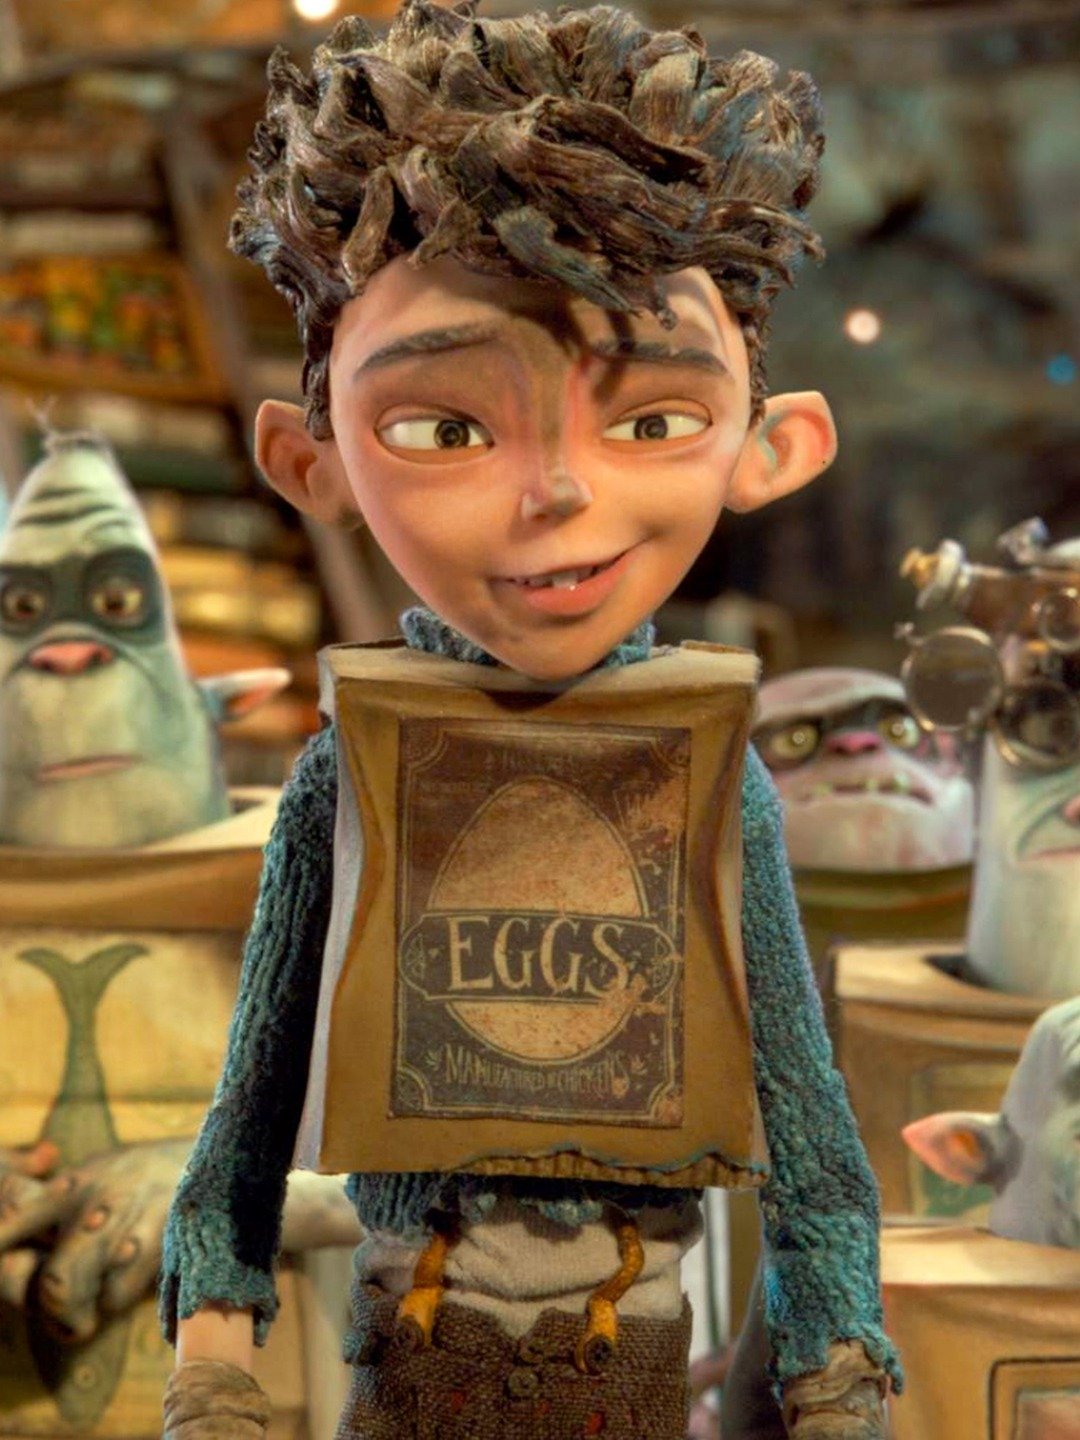 The Boxtrolls Trailer 1 Trailers And Videos Rotten Tomatoes